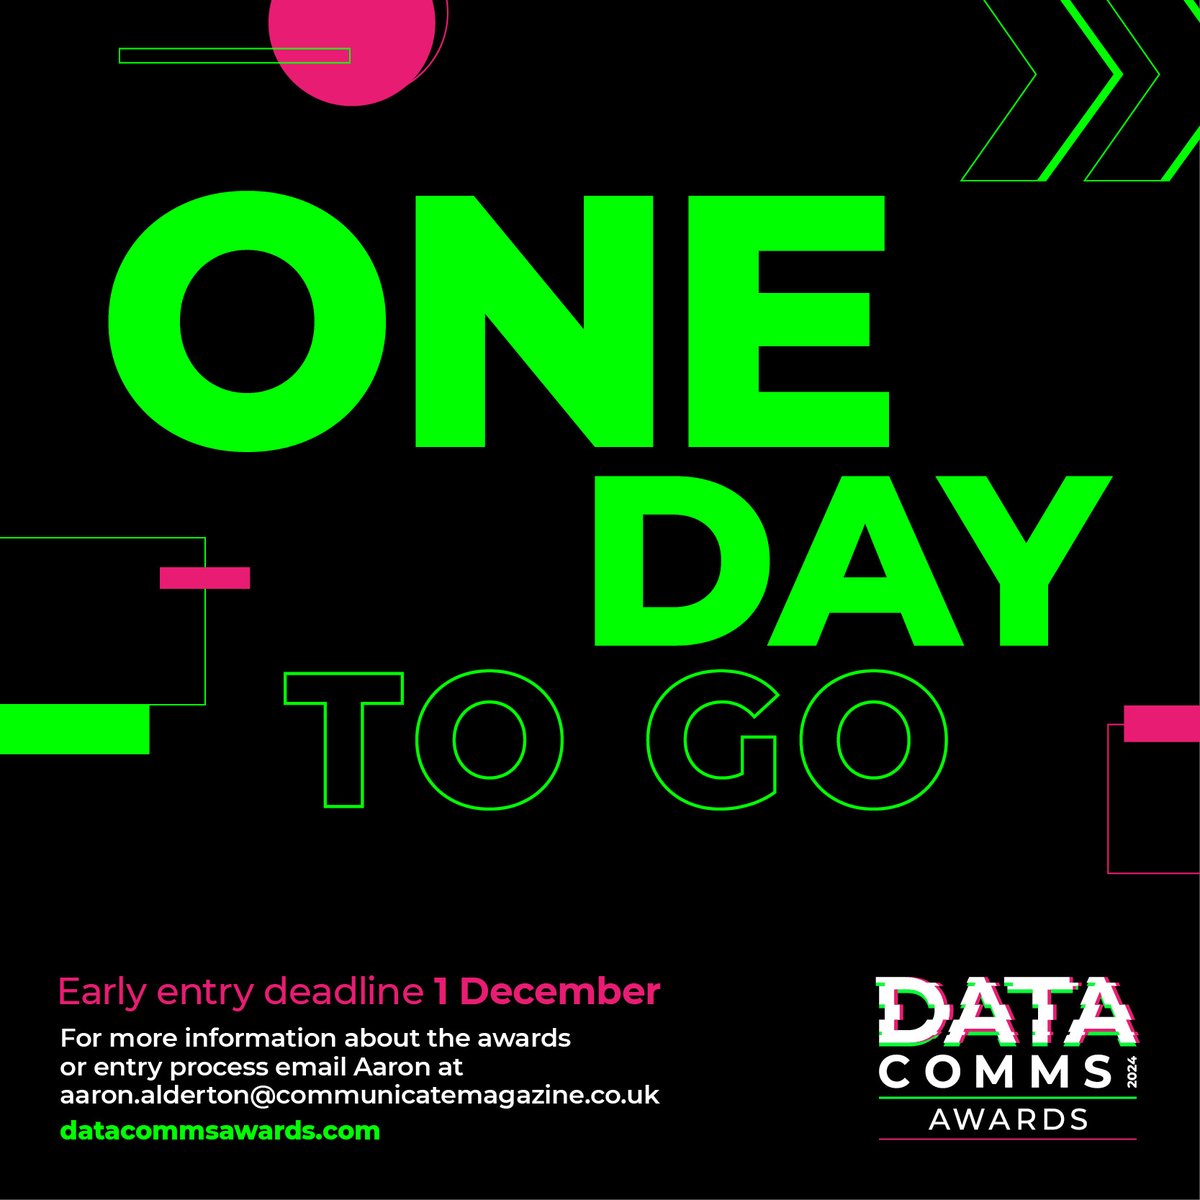 Only one day to go until the early entry deadline for the DataComms Awards! ⏱️
Get your entries in by the early entry deadline to save £100 on your total entry cost! 
Have a question❓
Feel free to get in touch with Aaron at aaron.alderton@communicatemagazine.co.uk   #DataComms